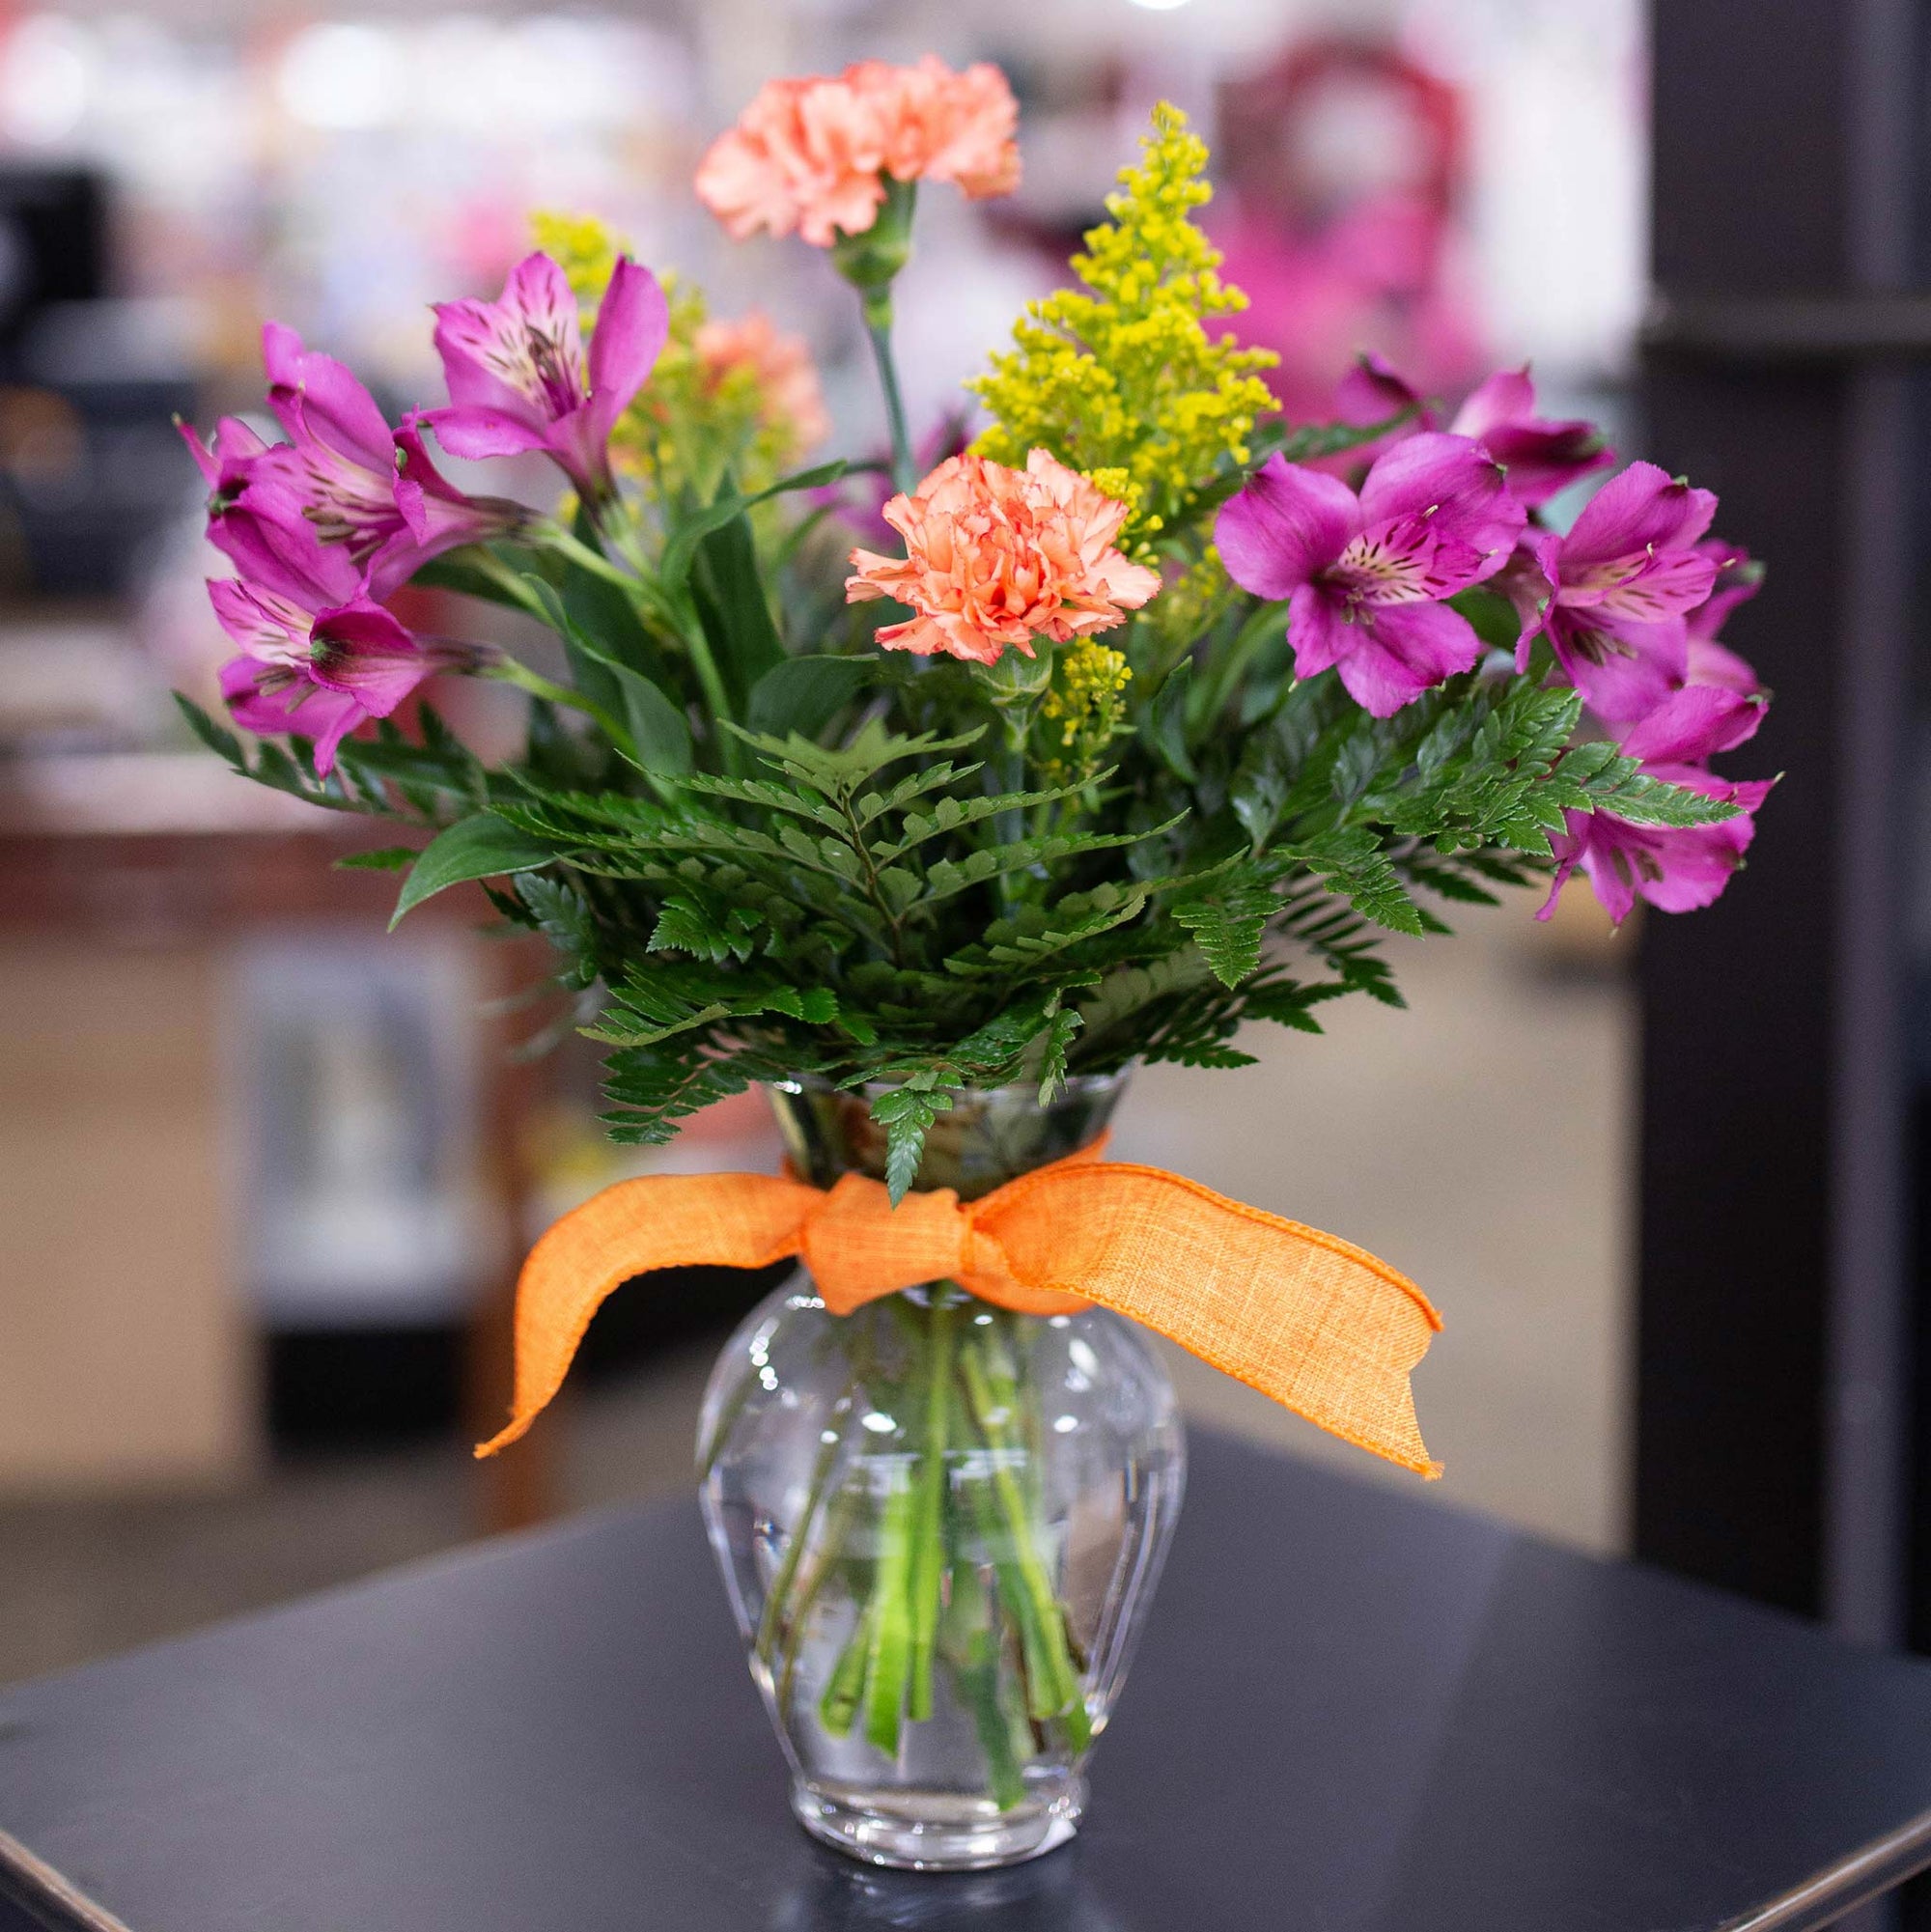 Orange carnations and purple and yellow flowers in a vase with ribbon